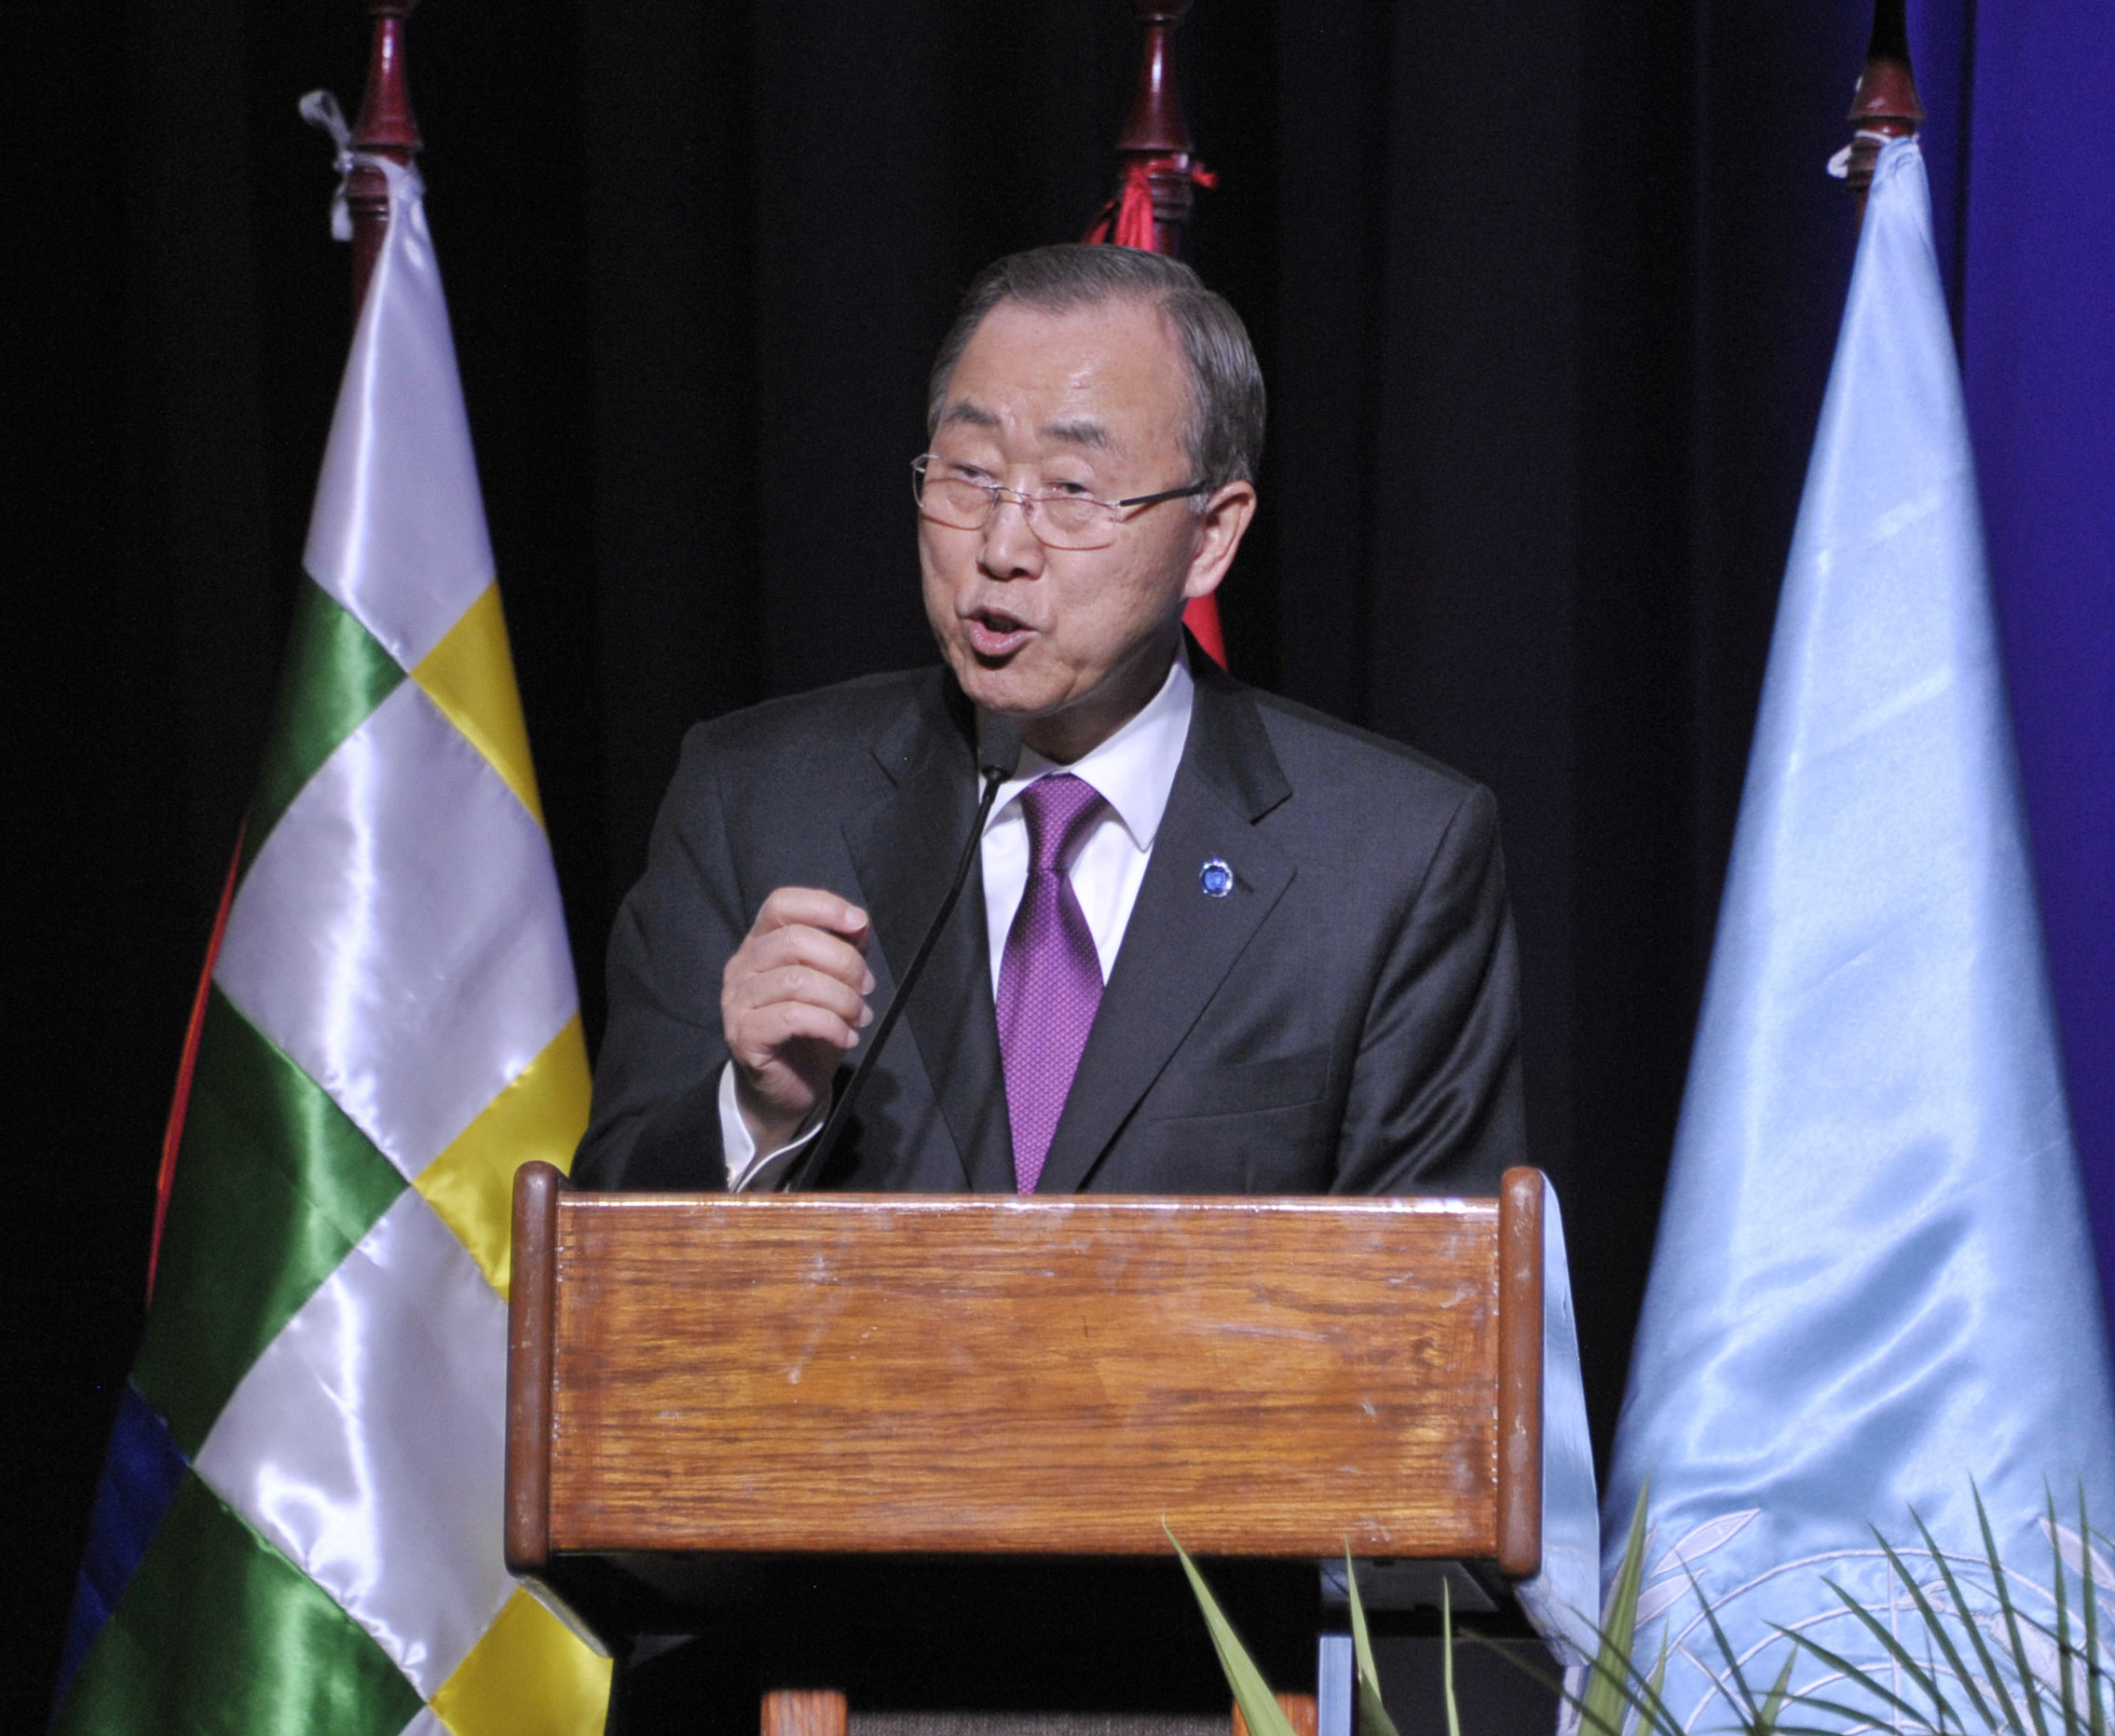 Ban Ki-moon addresses a crowd at the Bolivian climate change summit.